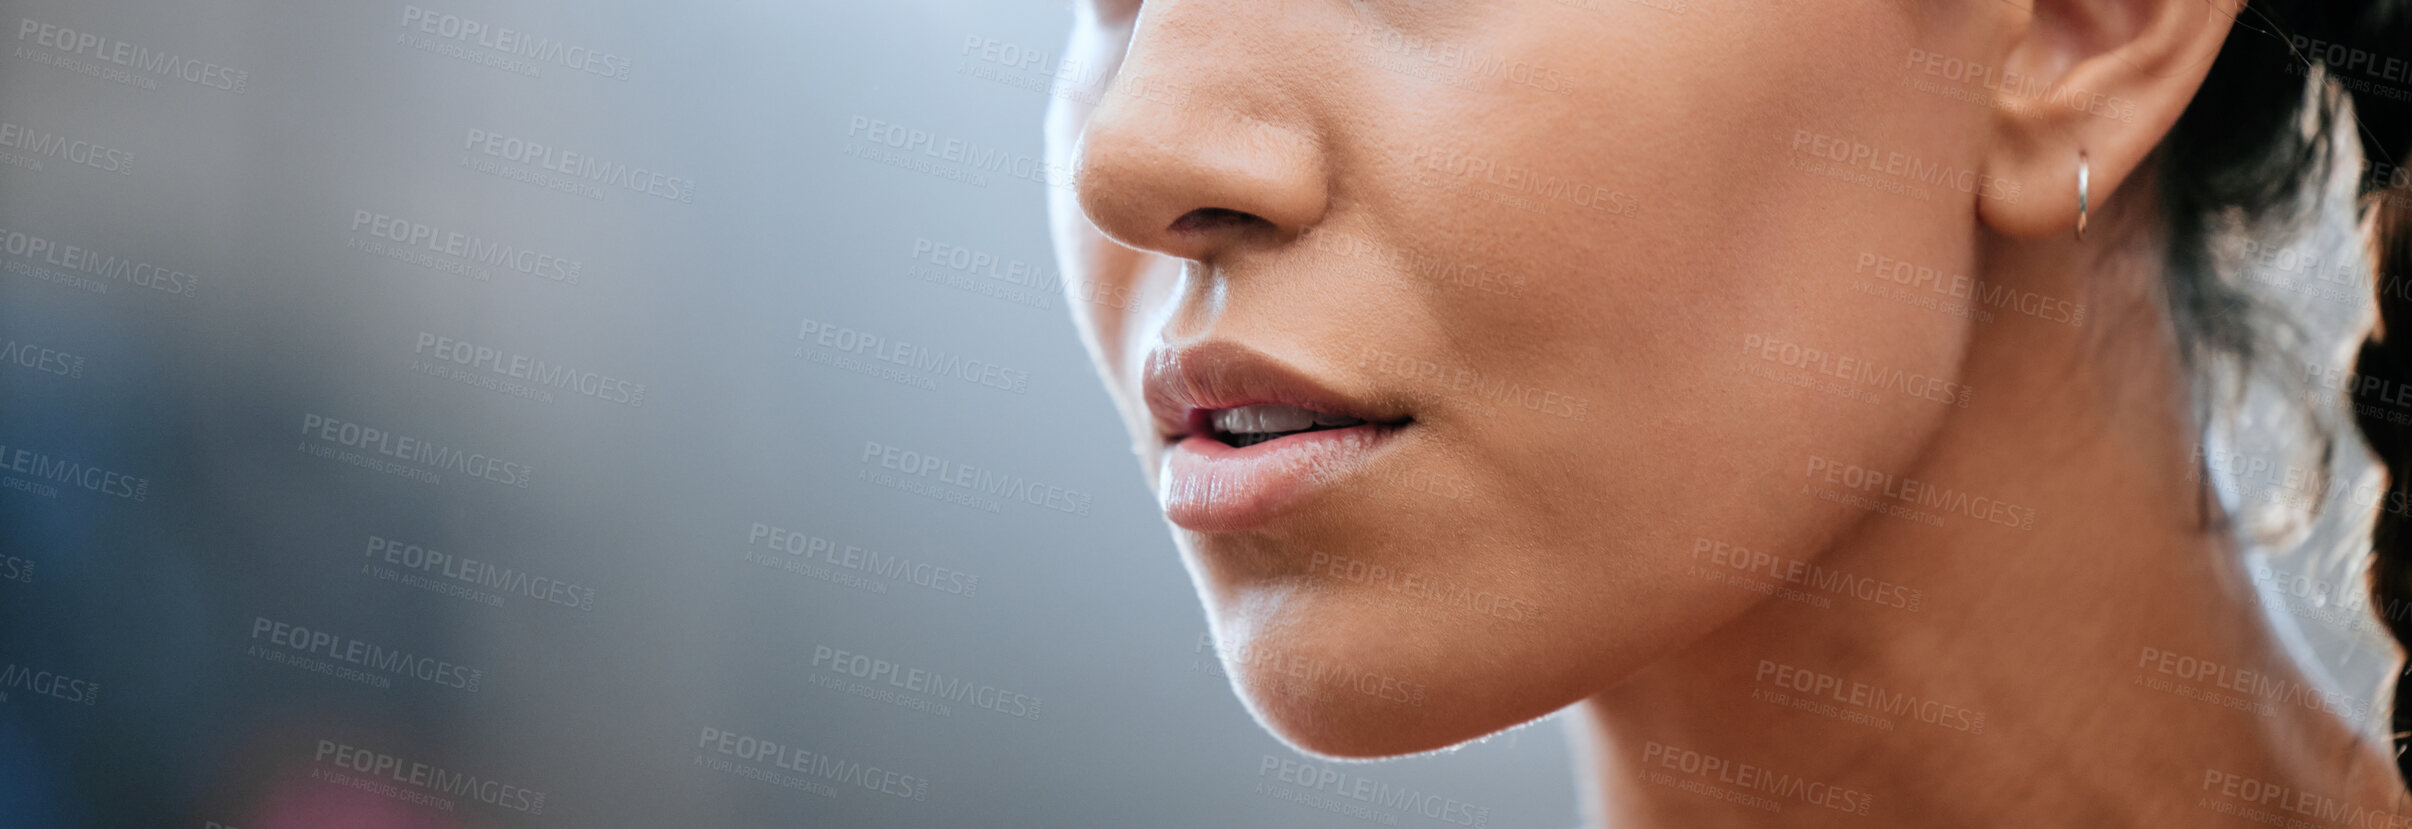 Buy stock photo Closeup banner of a woman's face, mouth and chin with blurred copy space. Young female looking confident, focused and determined. Breathing deeply while getting ready and preparing for a challenge